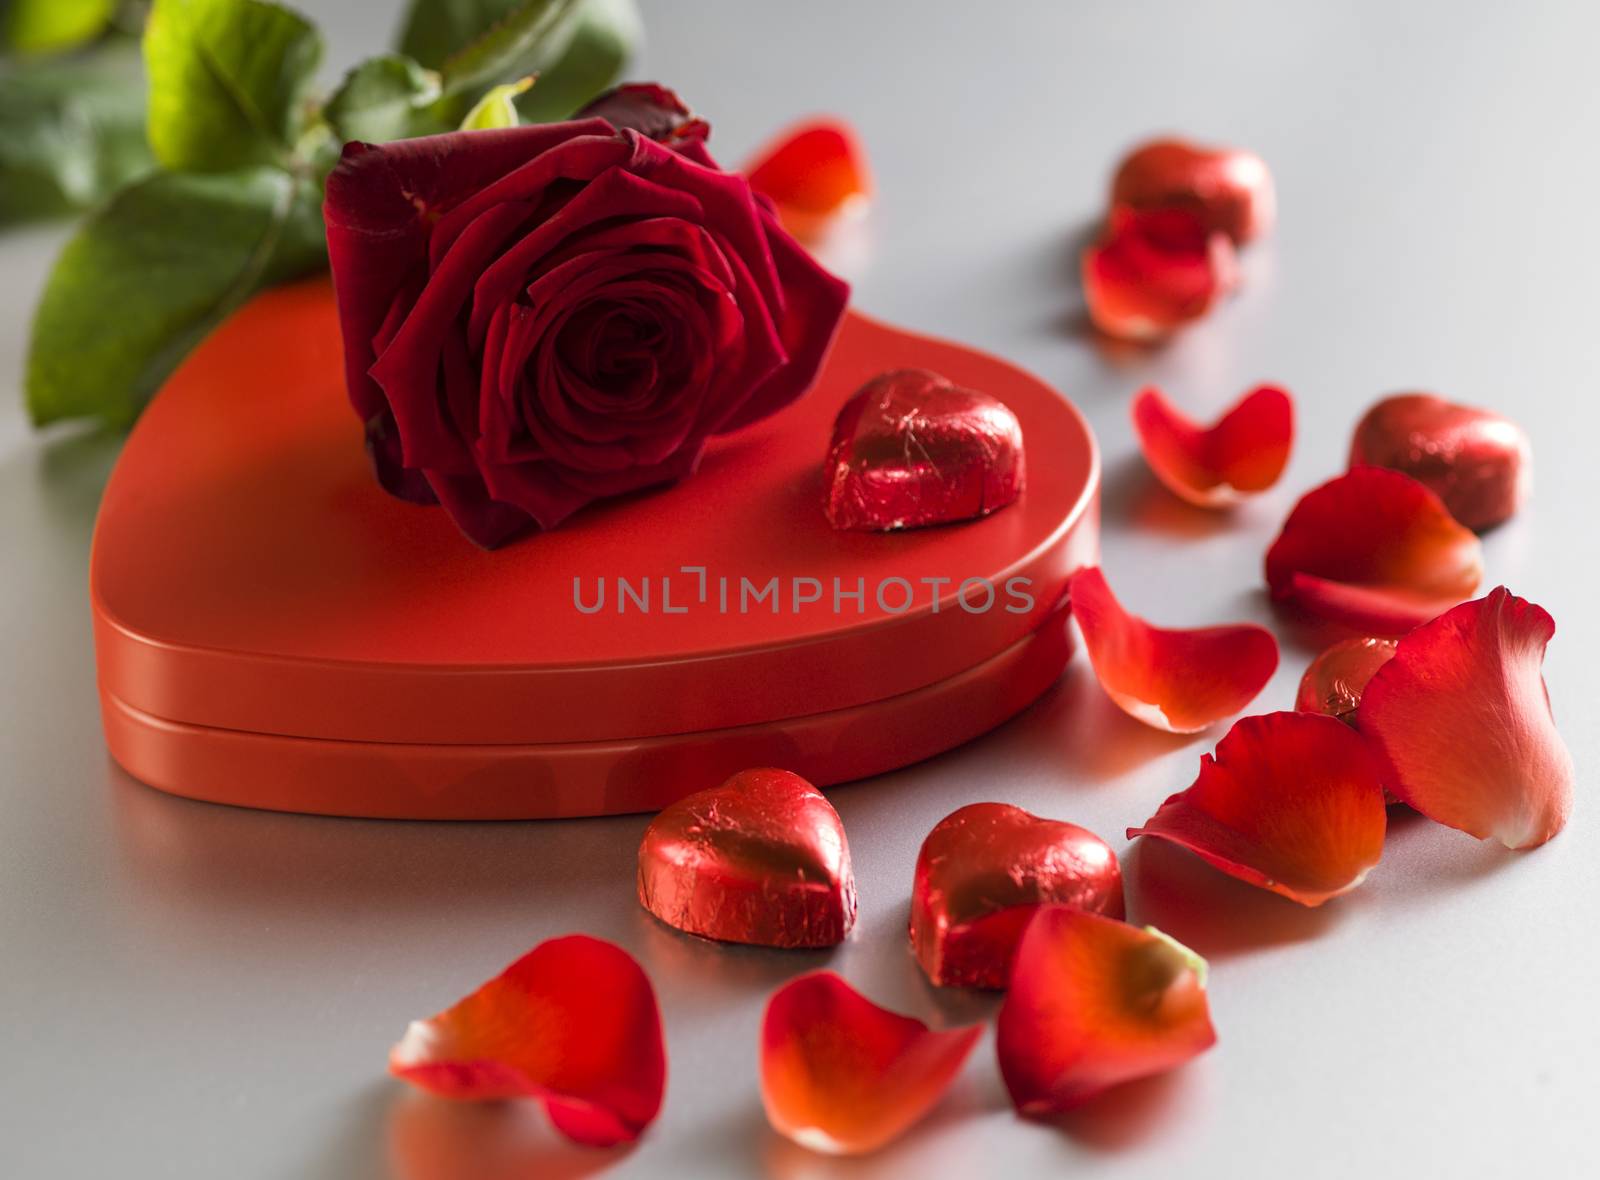 Red rose and box with red hearts on a white background by janssenkruseproductions